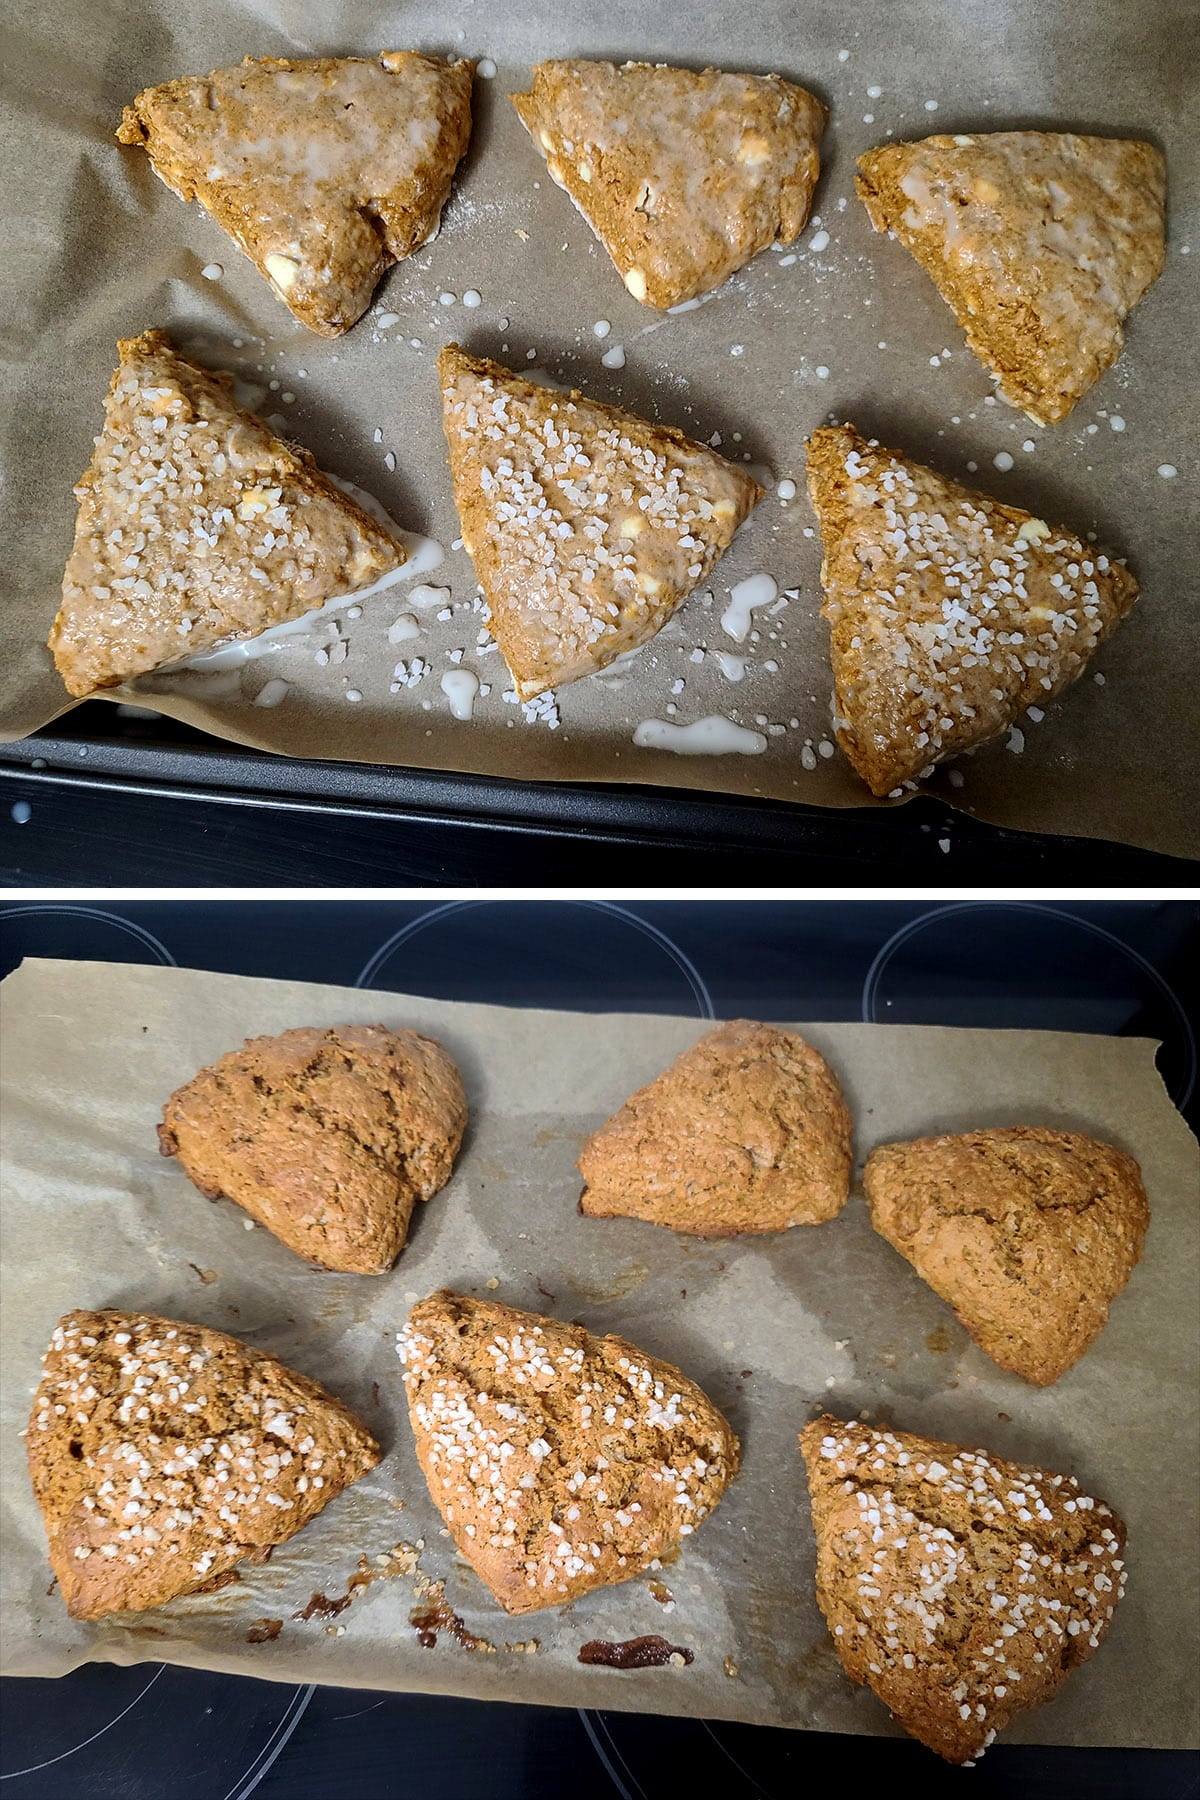 A 2 part image showing a pan of gingerbread scones, before and after baking.